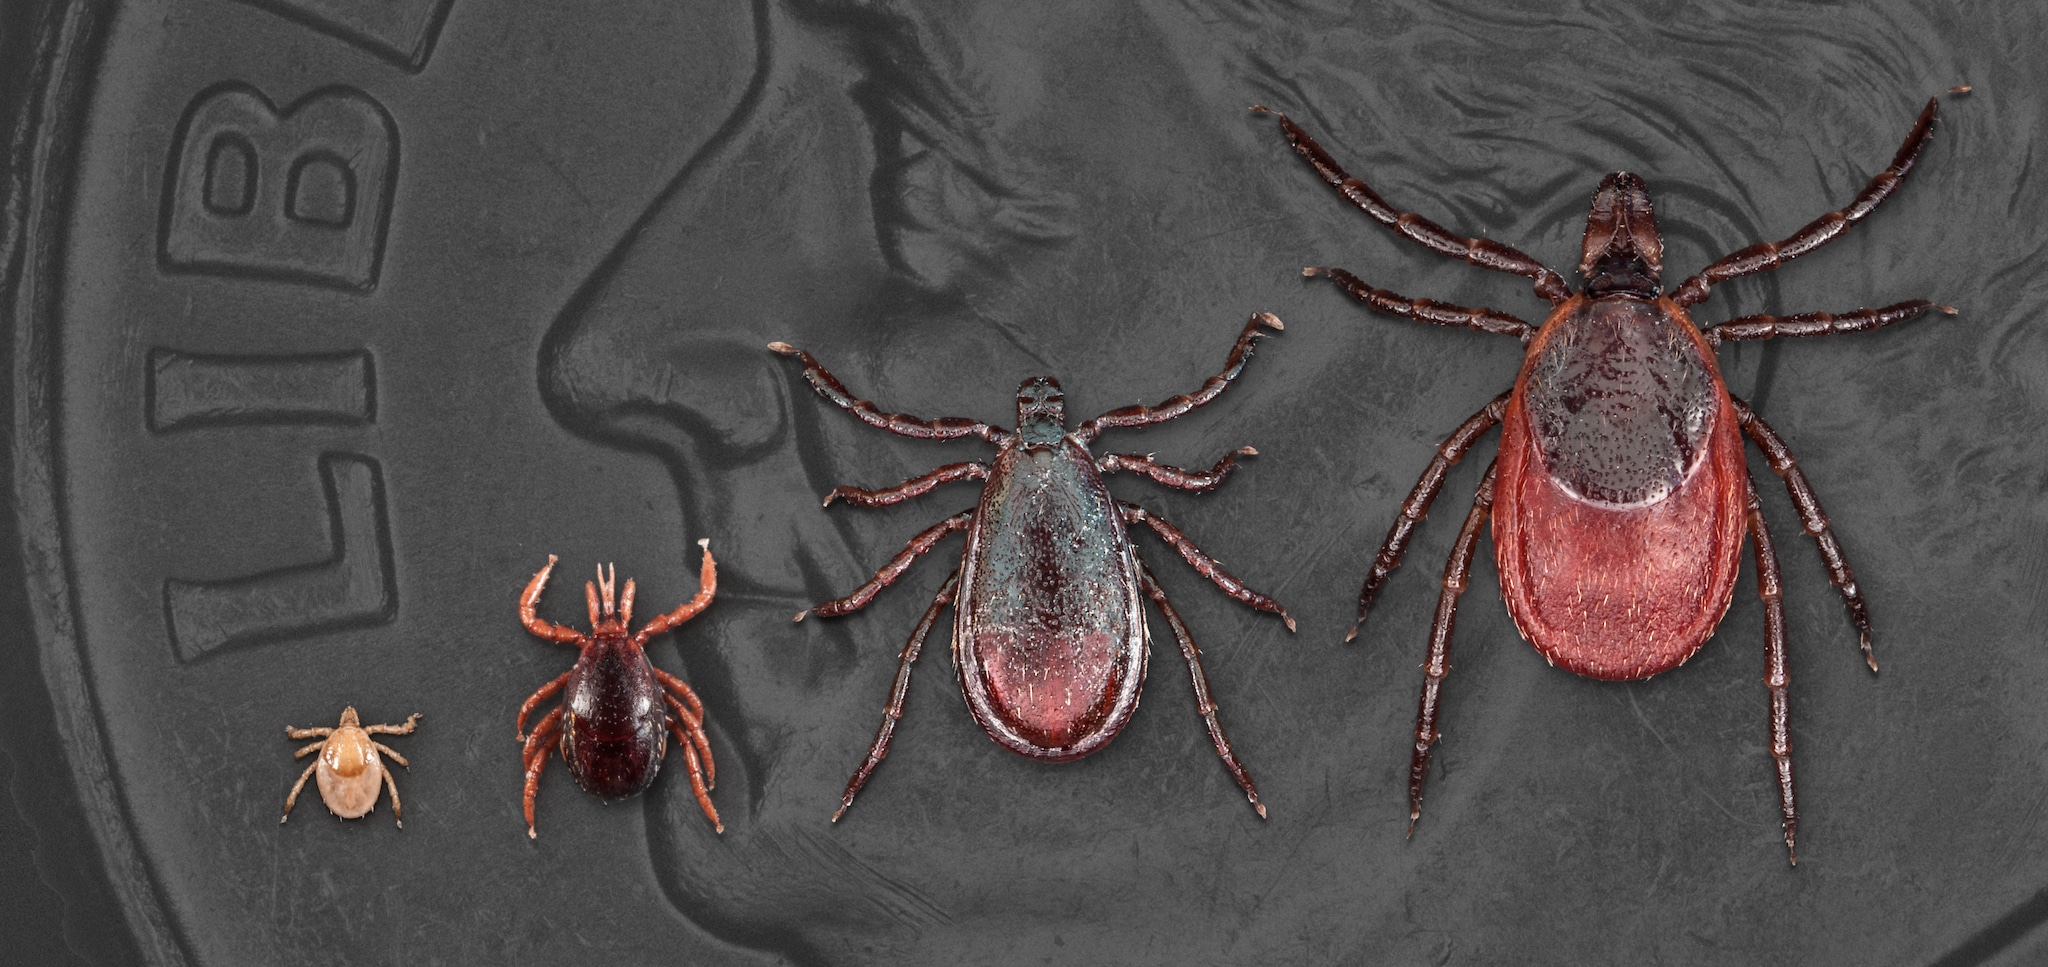 All life stages of Ixodes scapularis. Dime in background for scale.